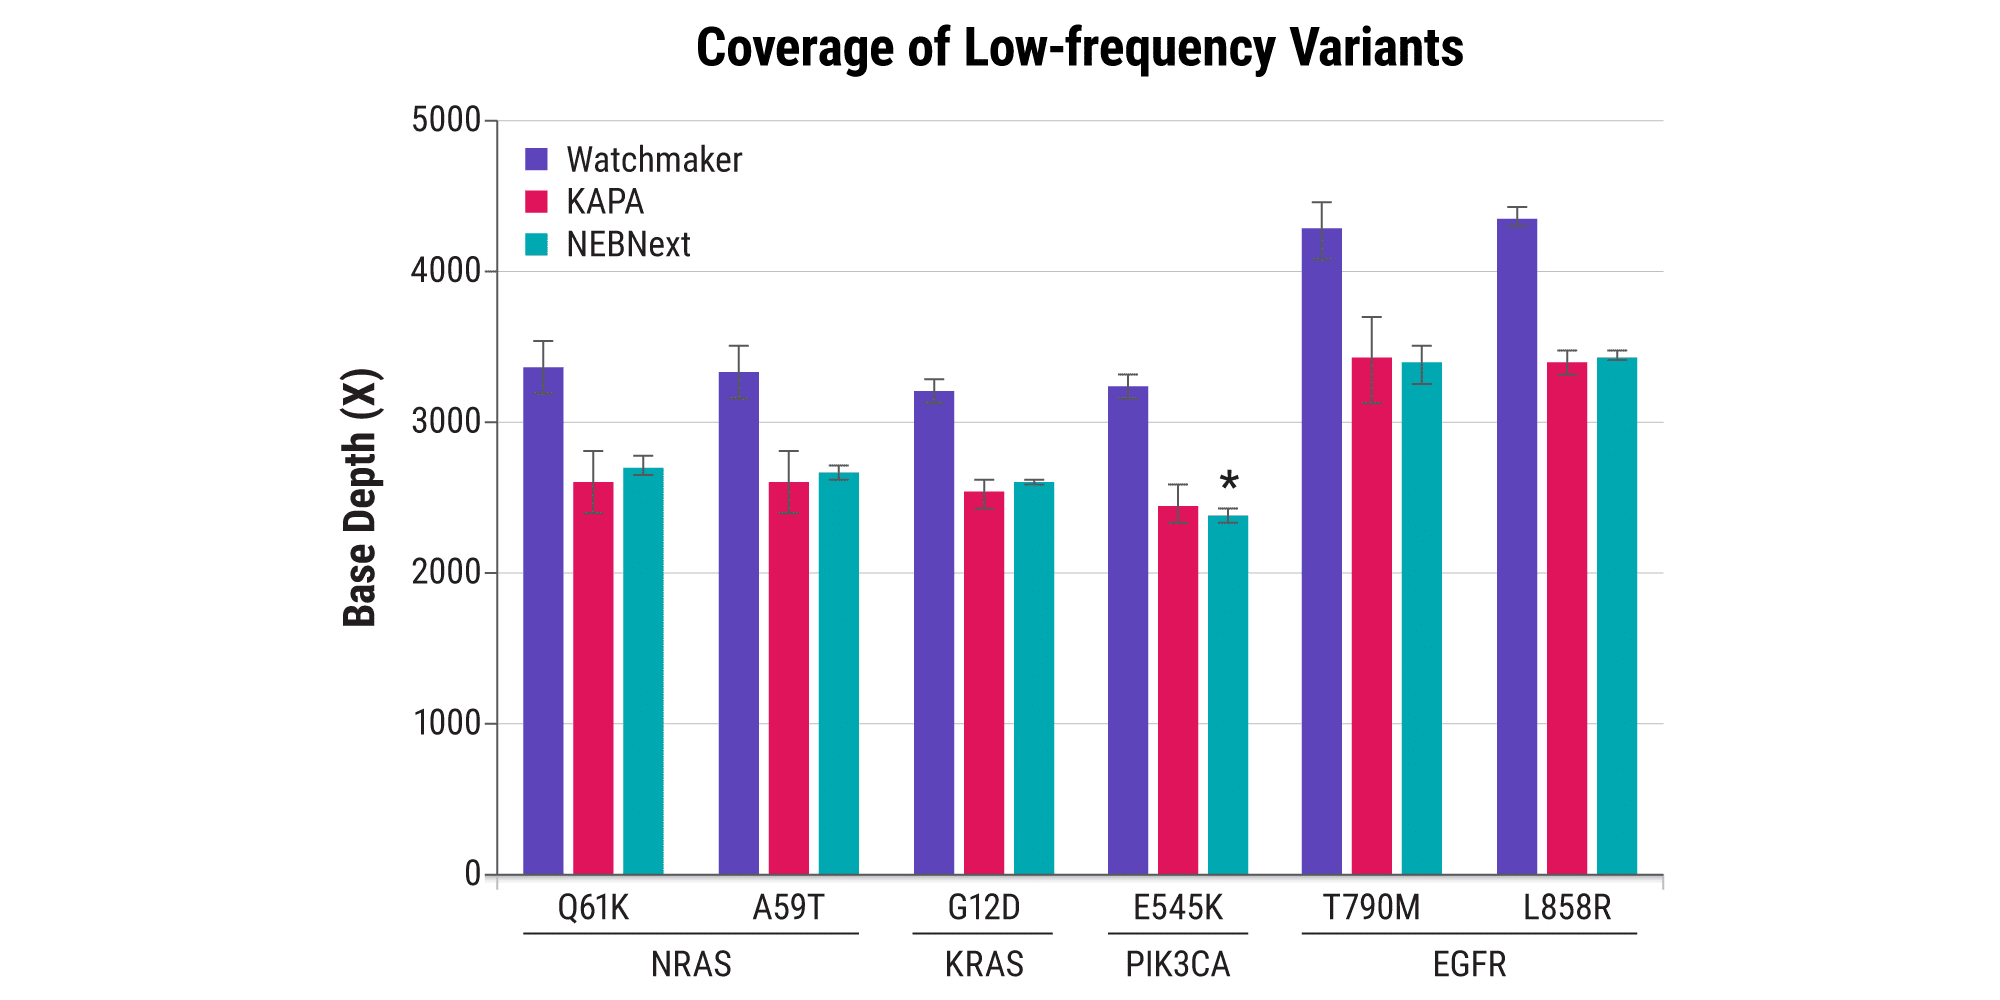 Figure 1. High-depth coverage of rare variants. Cell-free DNA libraries were constructed in triplicate from 25 ng of a reference sample (HD779, Horizon Discovery) containing eight mutations at a verified allele frequency (AF) of 0.1%. Libraries were prepared with the Watchmaker DNA Library Prep Kit, KAPA HyperPrep Kit, or NEBNext® Ultra™ II for DNA Library Prep according to each manufacturer’s recommended protocol. Twelve-plex target enrichment was performed using a 37 kb custom oncology panel. Sequencing was performed on a NovaSeq™ 6000. Data were randomly subsampled to 25 million read pairs per library.  All expected variants were detected in all replicates, except for one true positive (*), missed in one of the NEB replicate libraries. Watchmaker libraries showed higher coverage depth for all mutations.